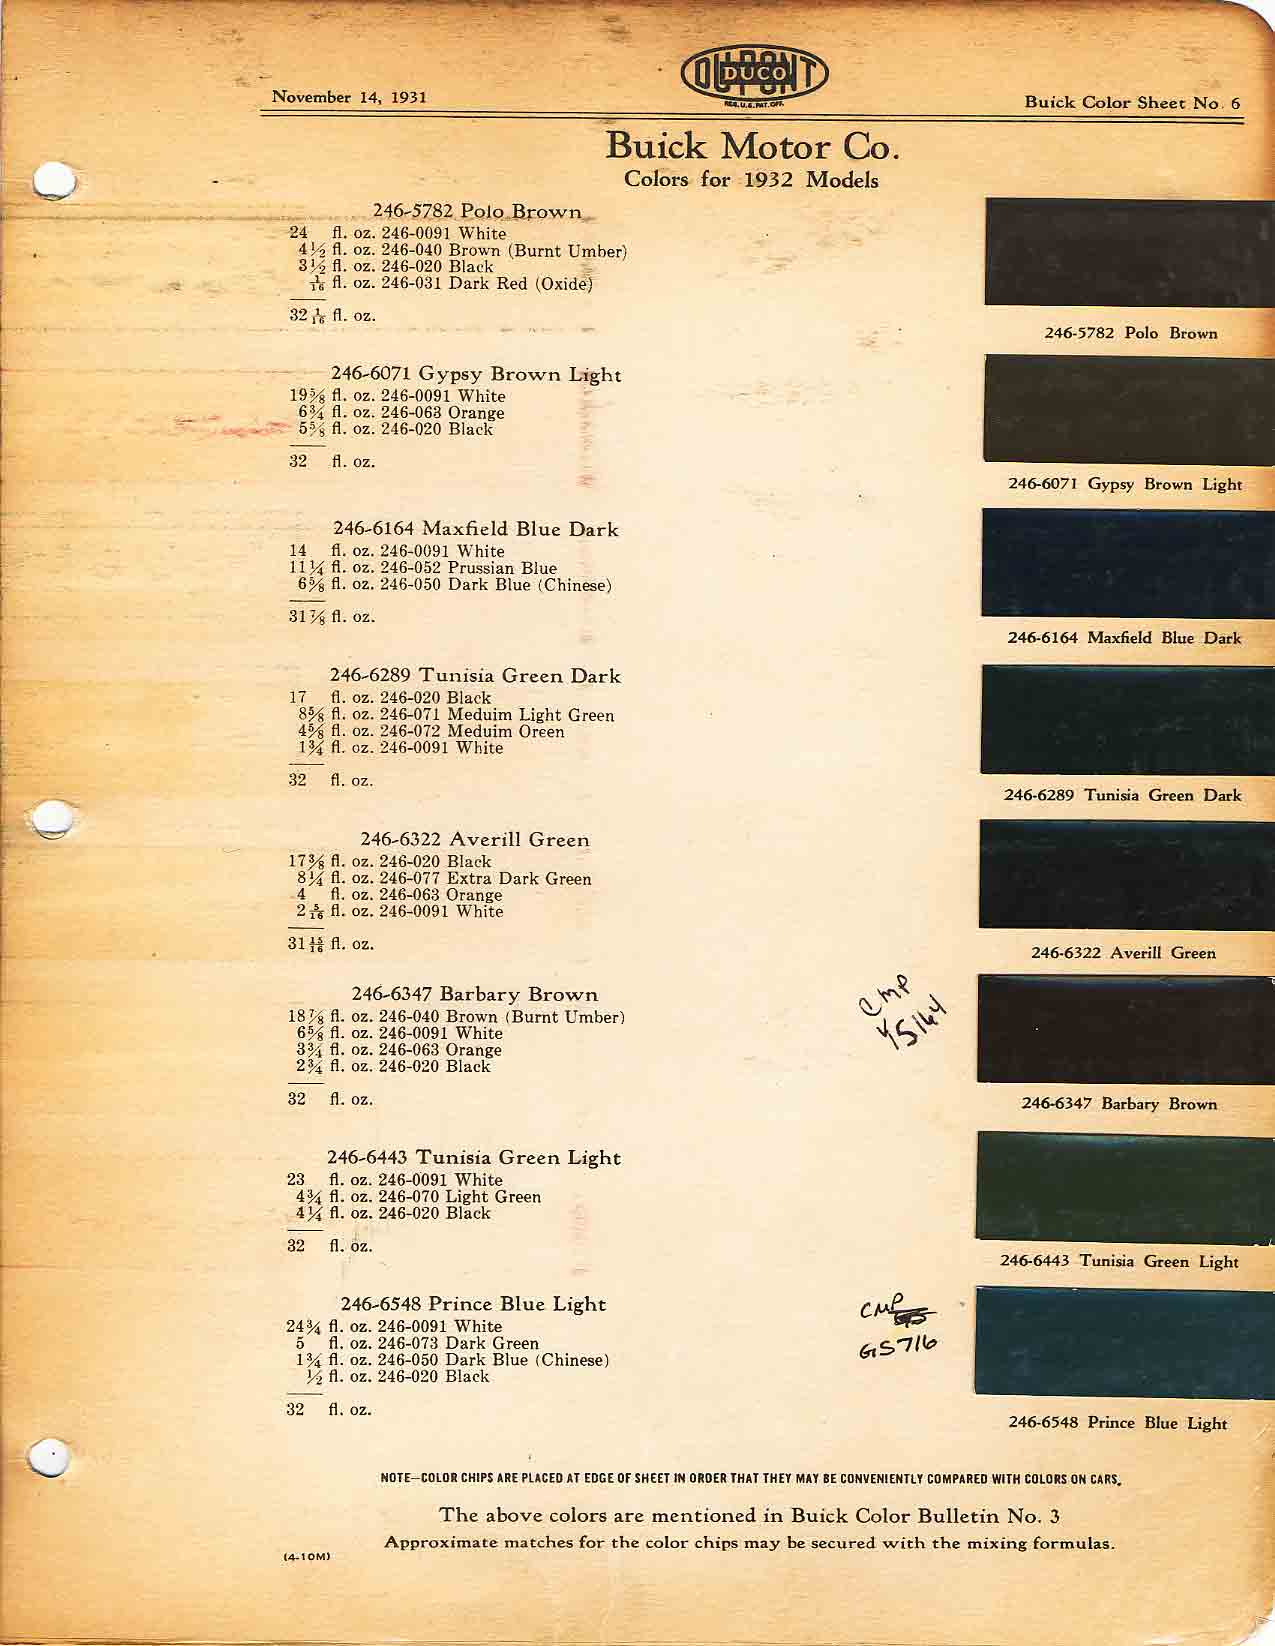 Colors and codes used on Buick Vehicles in 1932